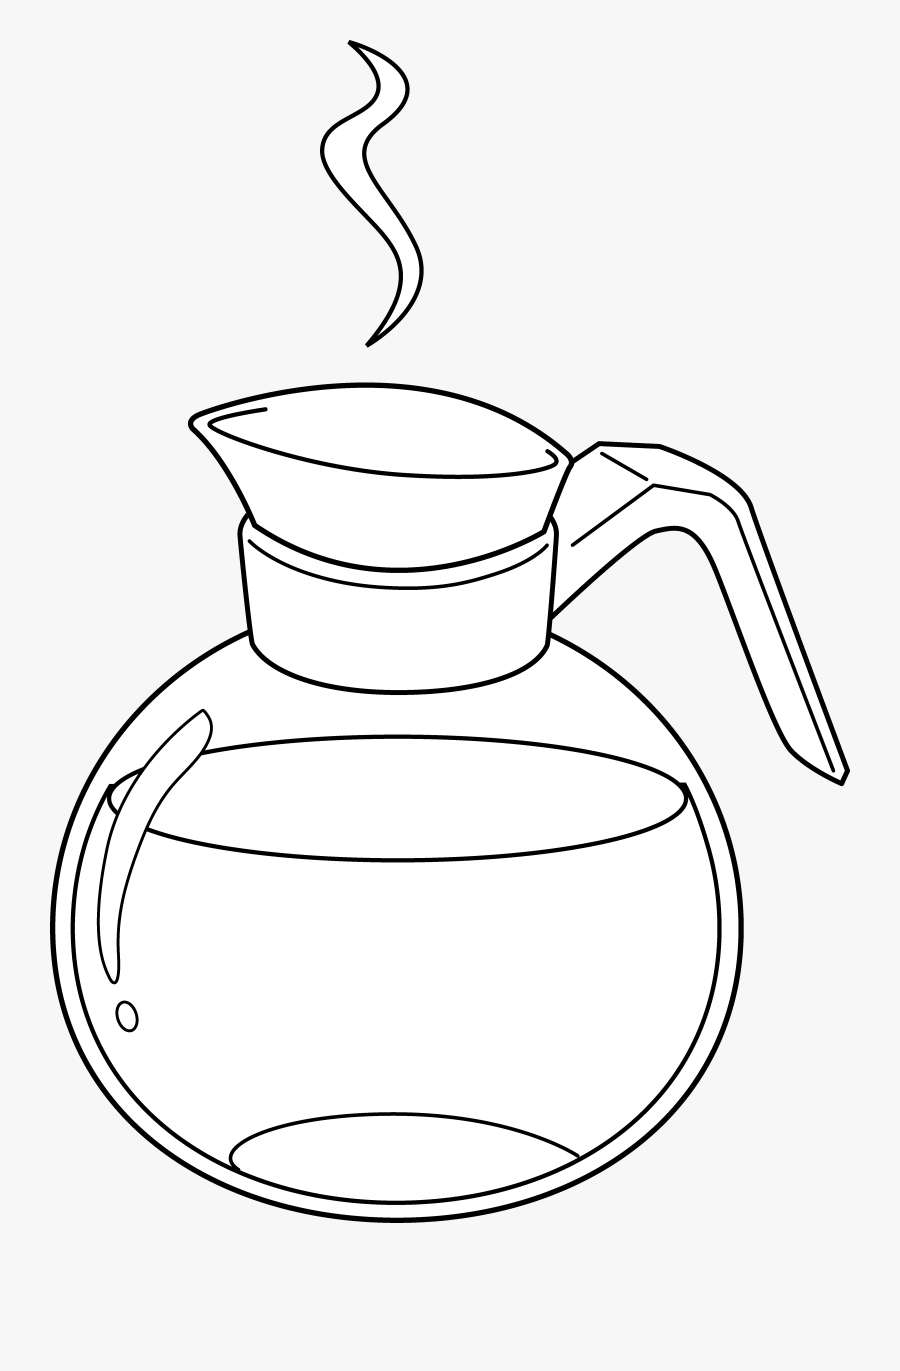 Pictures Of Coffee Pots - Coffee Pot Drawing, Transparent Clipart